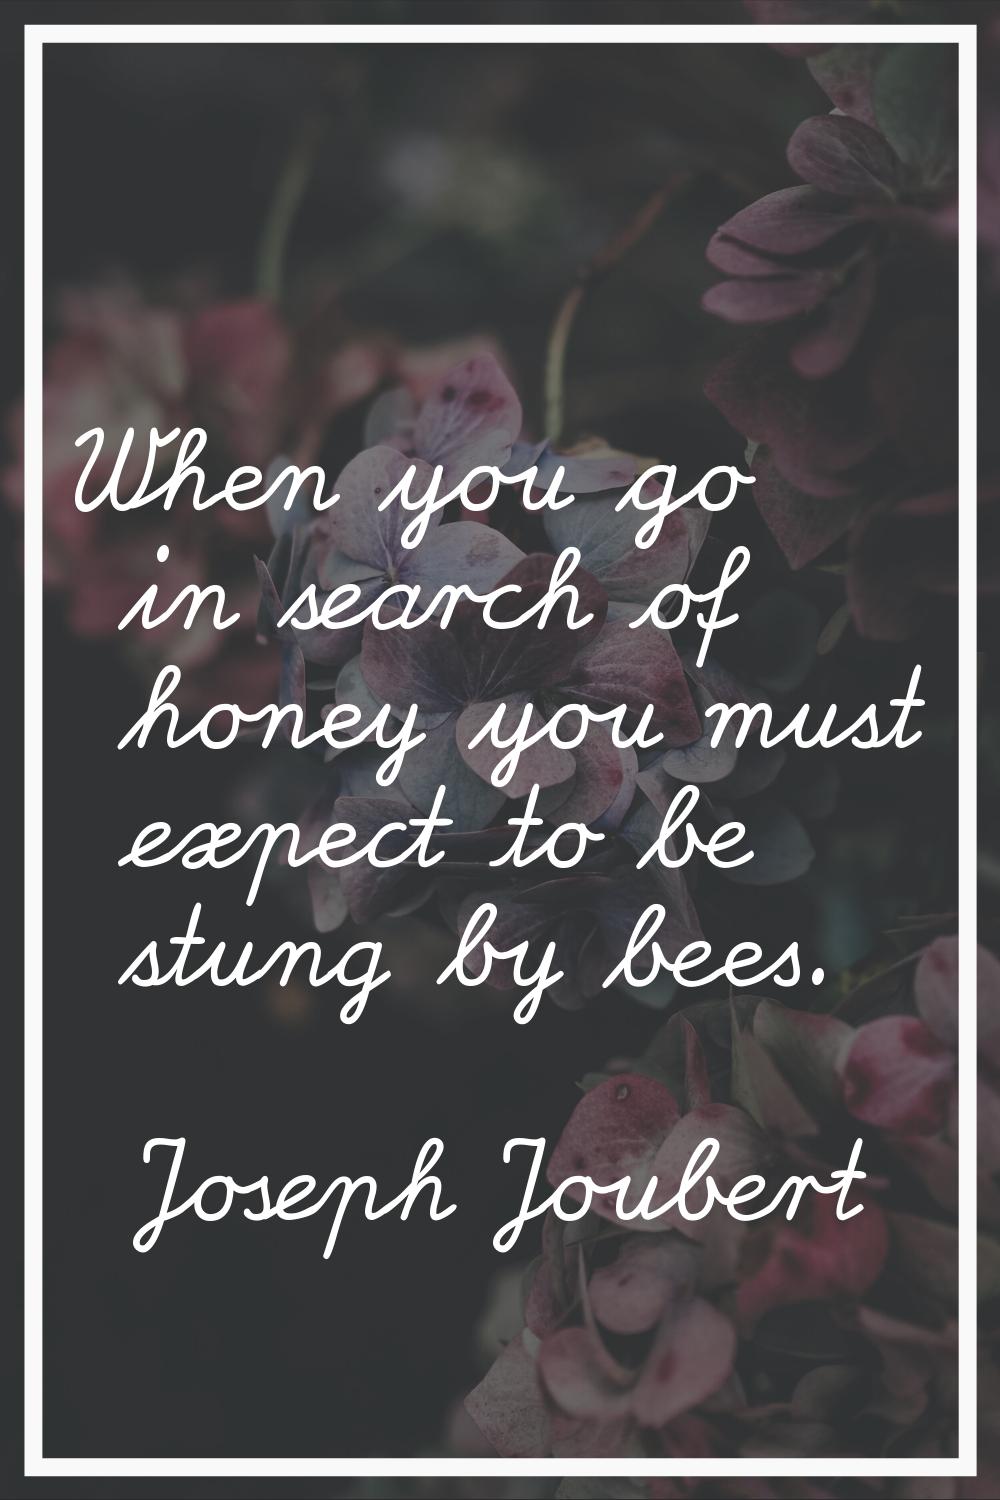 When you go in search of honey you must expect to be stung by bees.